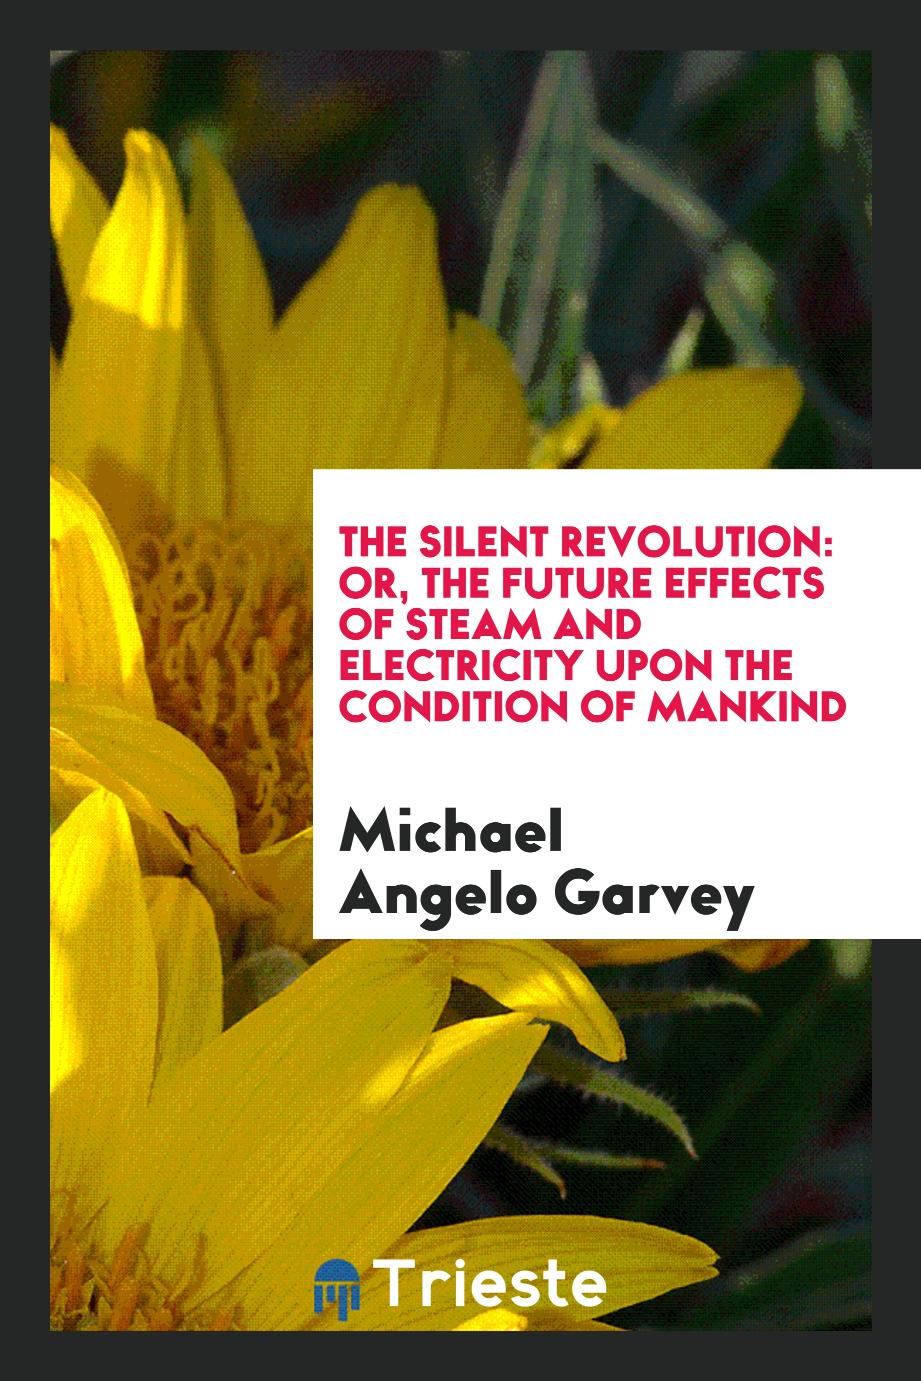 The silent revolution: or, The future effects of steam and electricity upon the condition of mankind